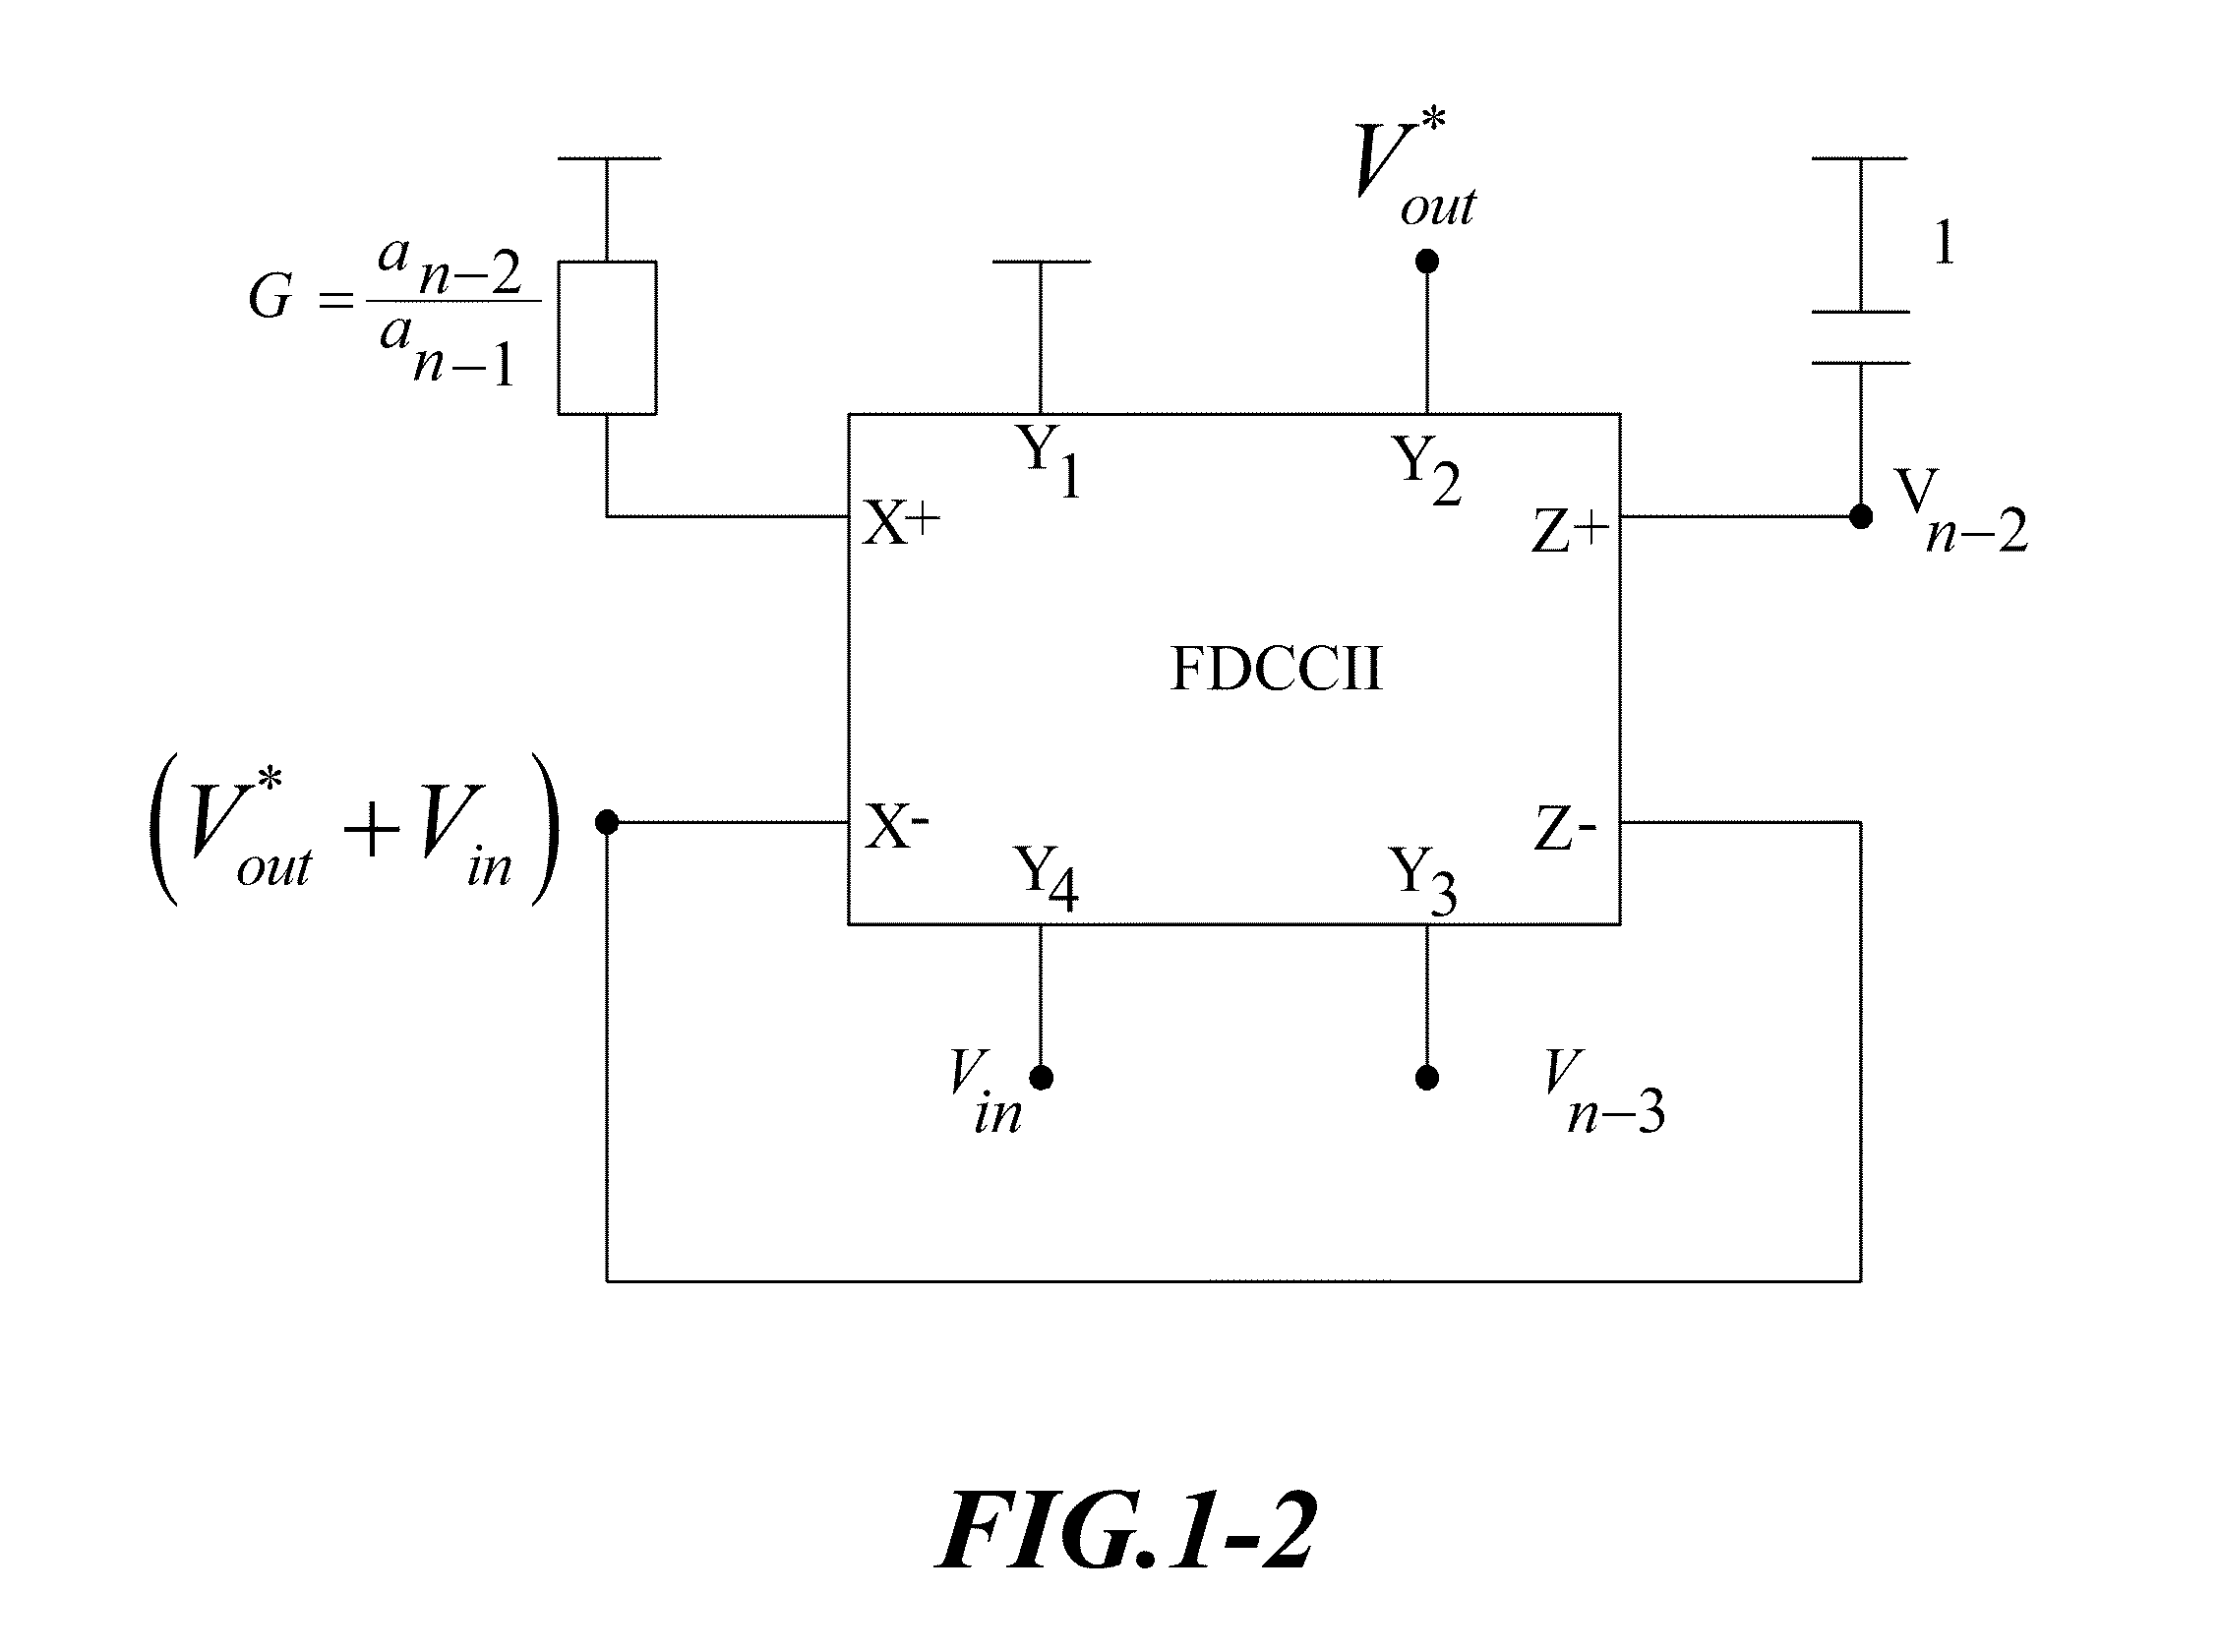 DDCC and FDCCII-Grounded Resistor and Capacitor Filter Structures